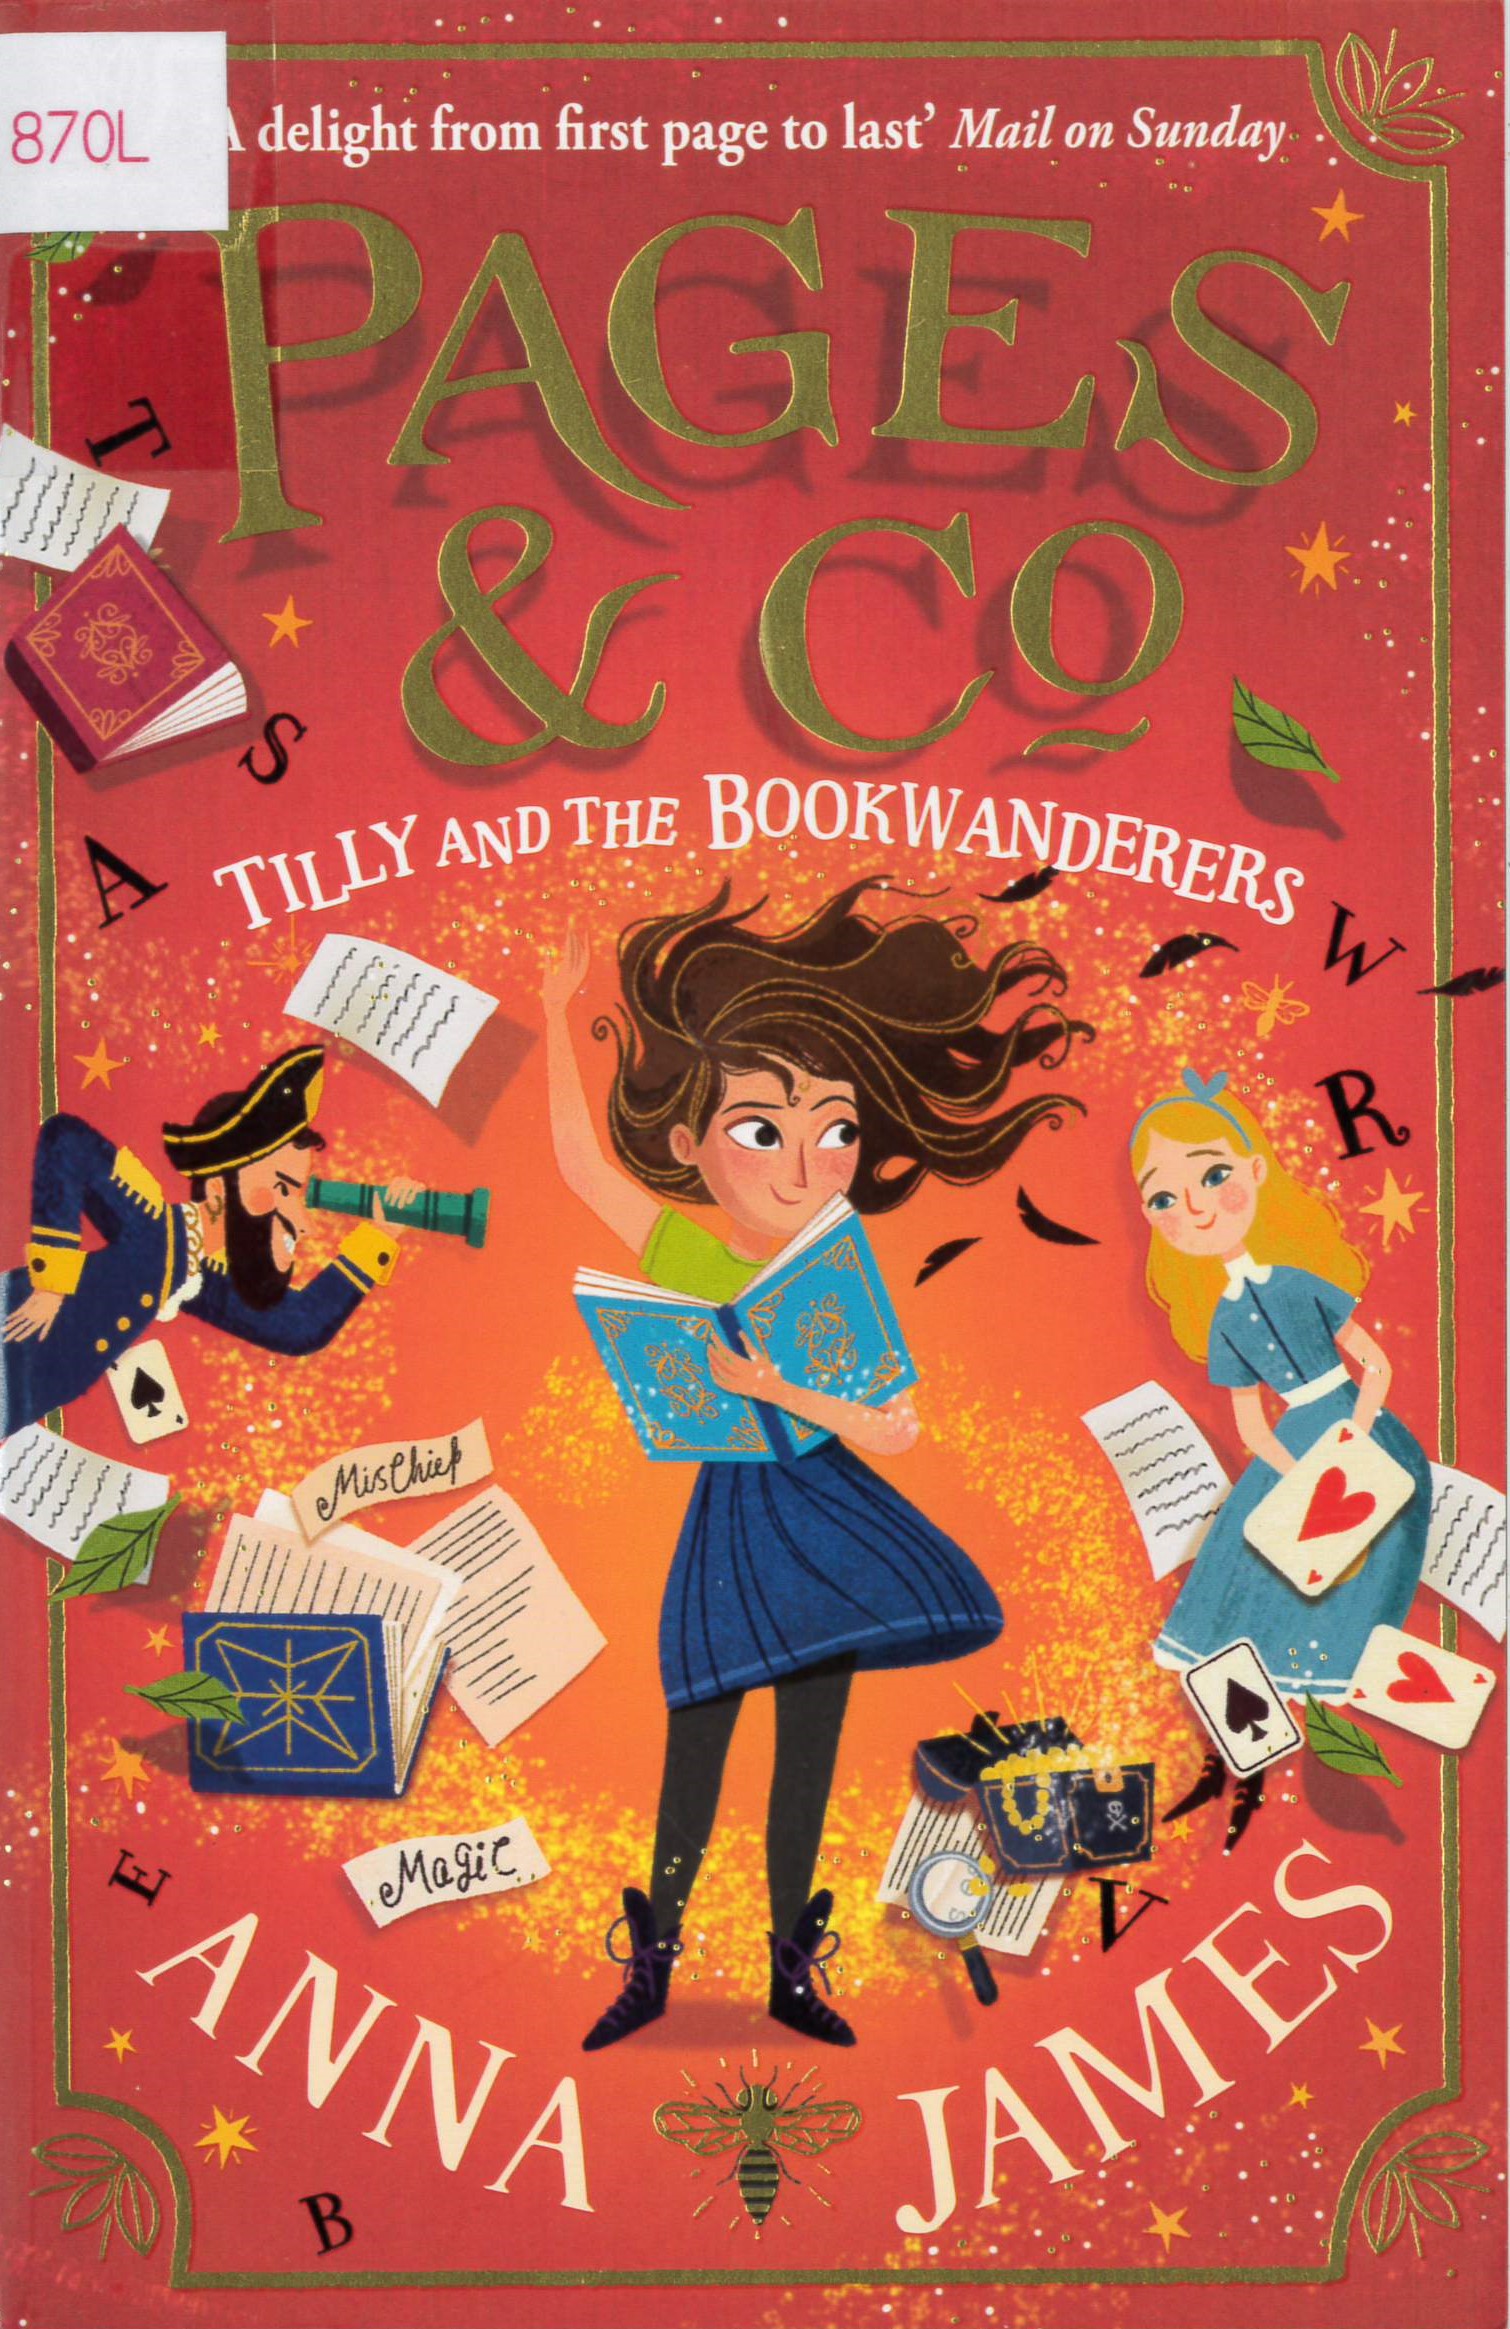 Tilly and the bookwanderers